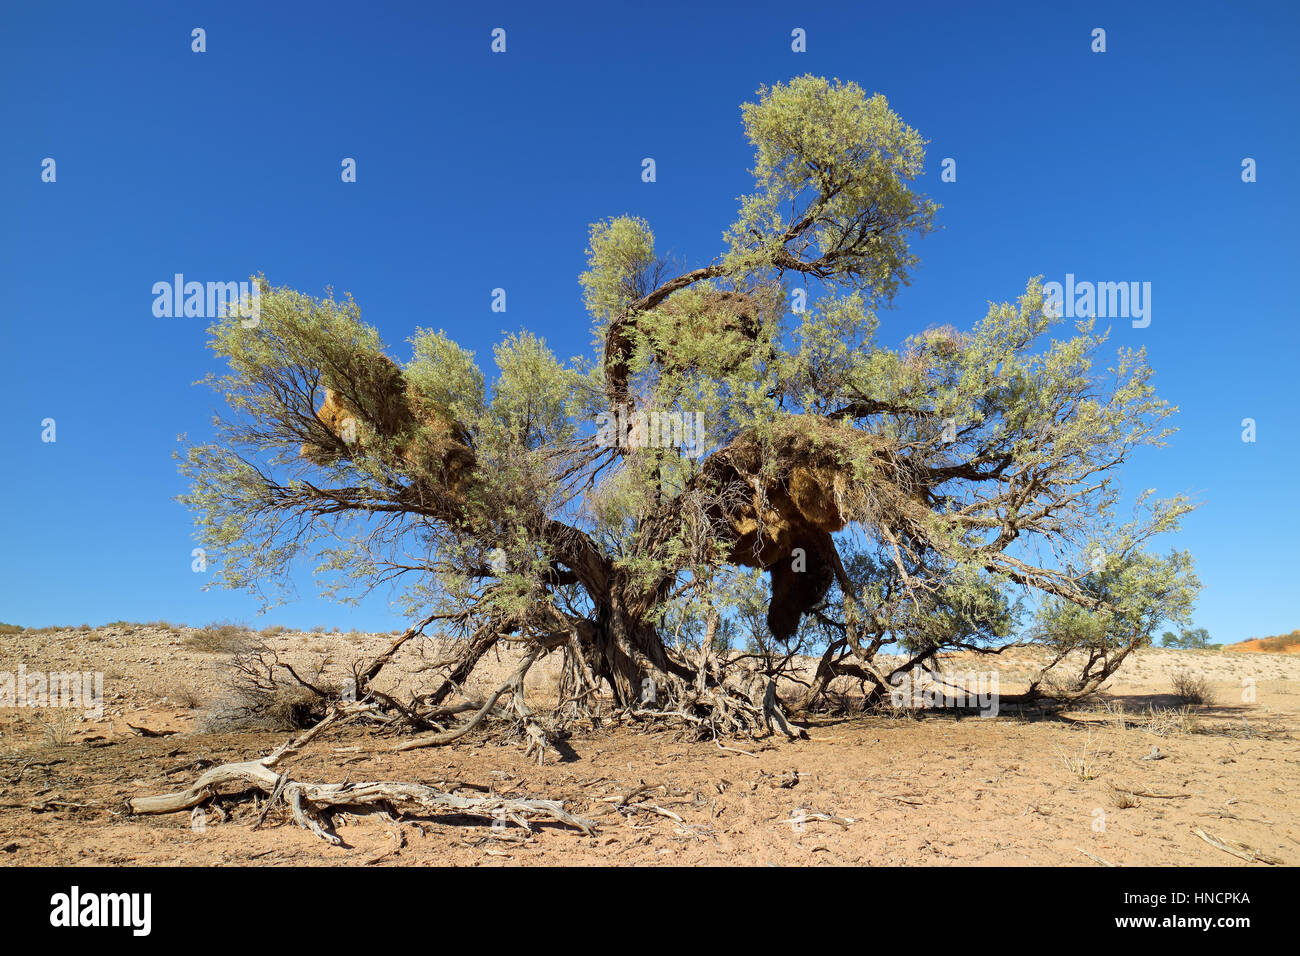 African thorn tree with large communal nests of sociable weavers, Kalahari desert, South Africa Stock Photo